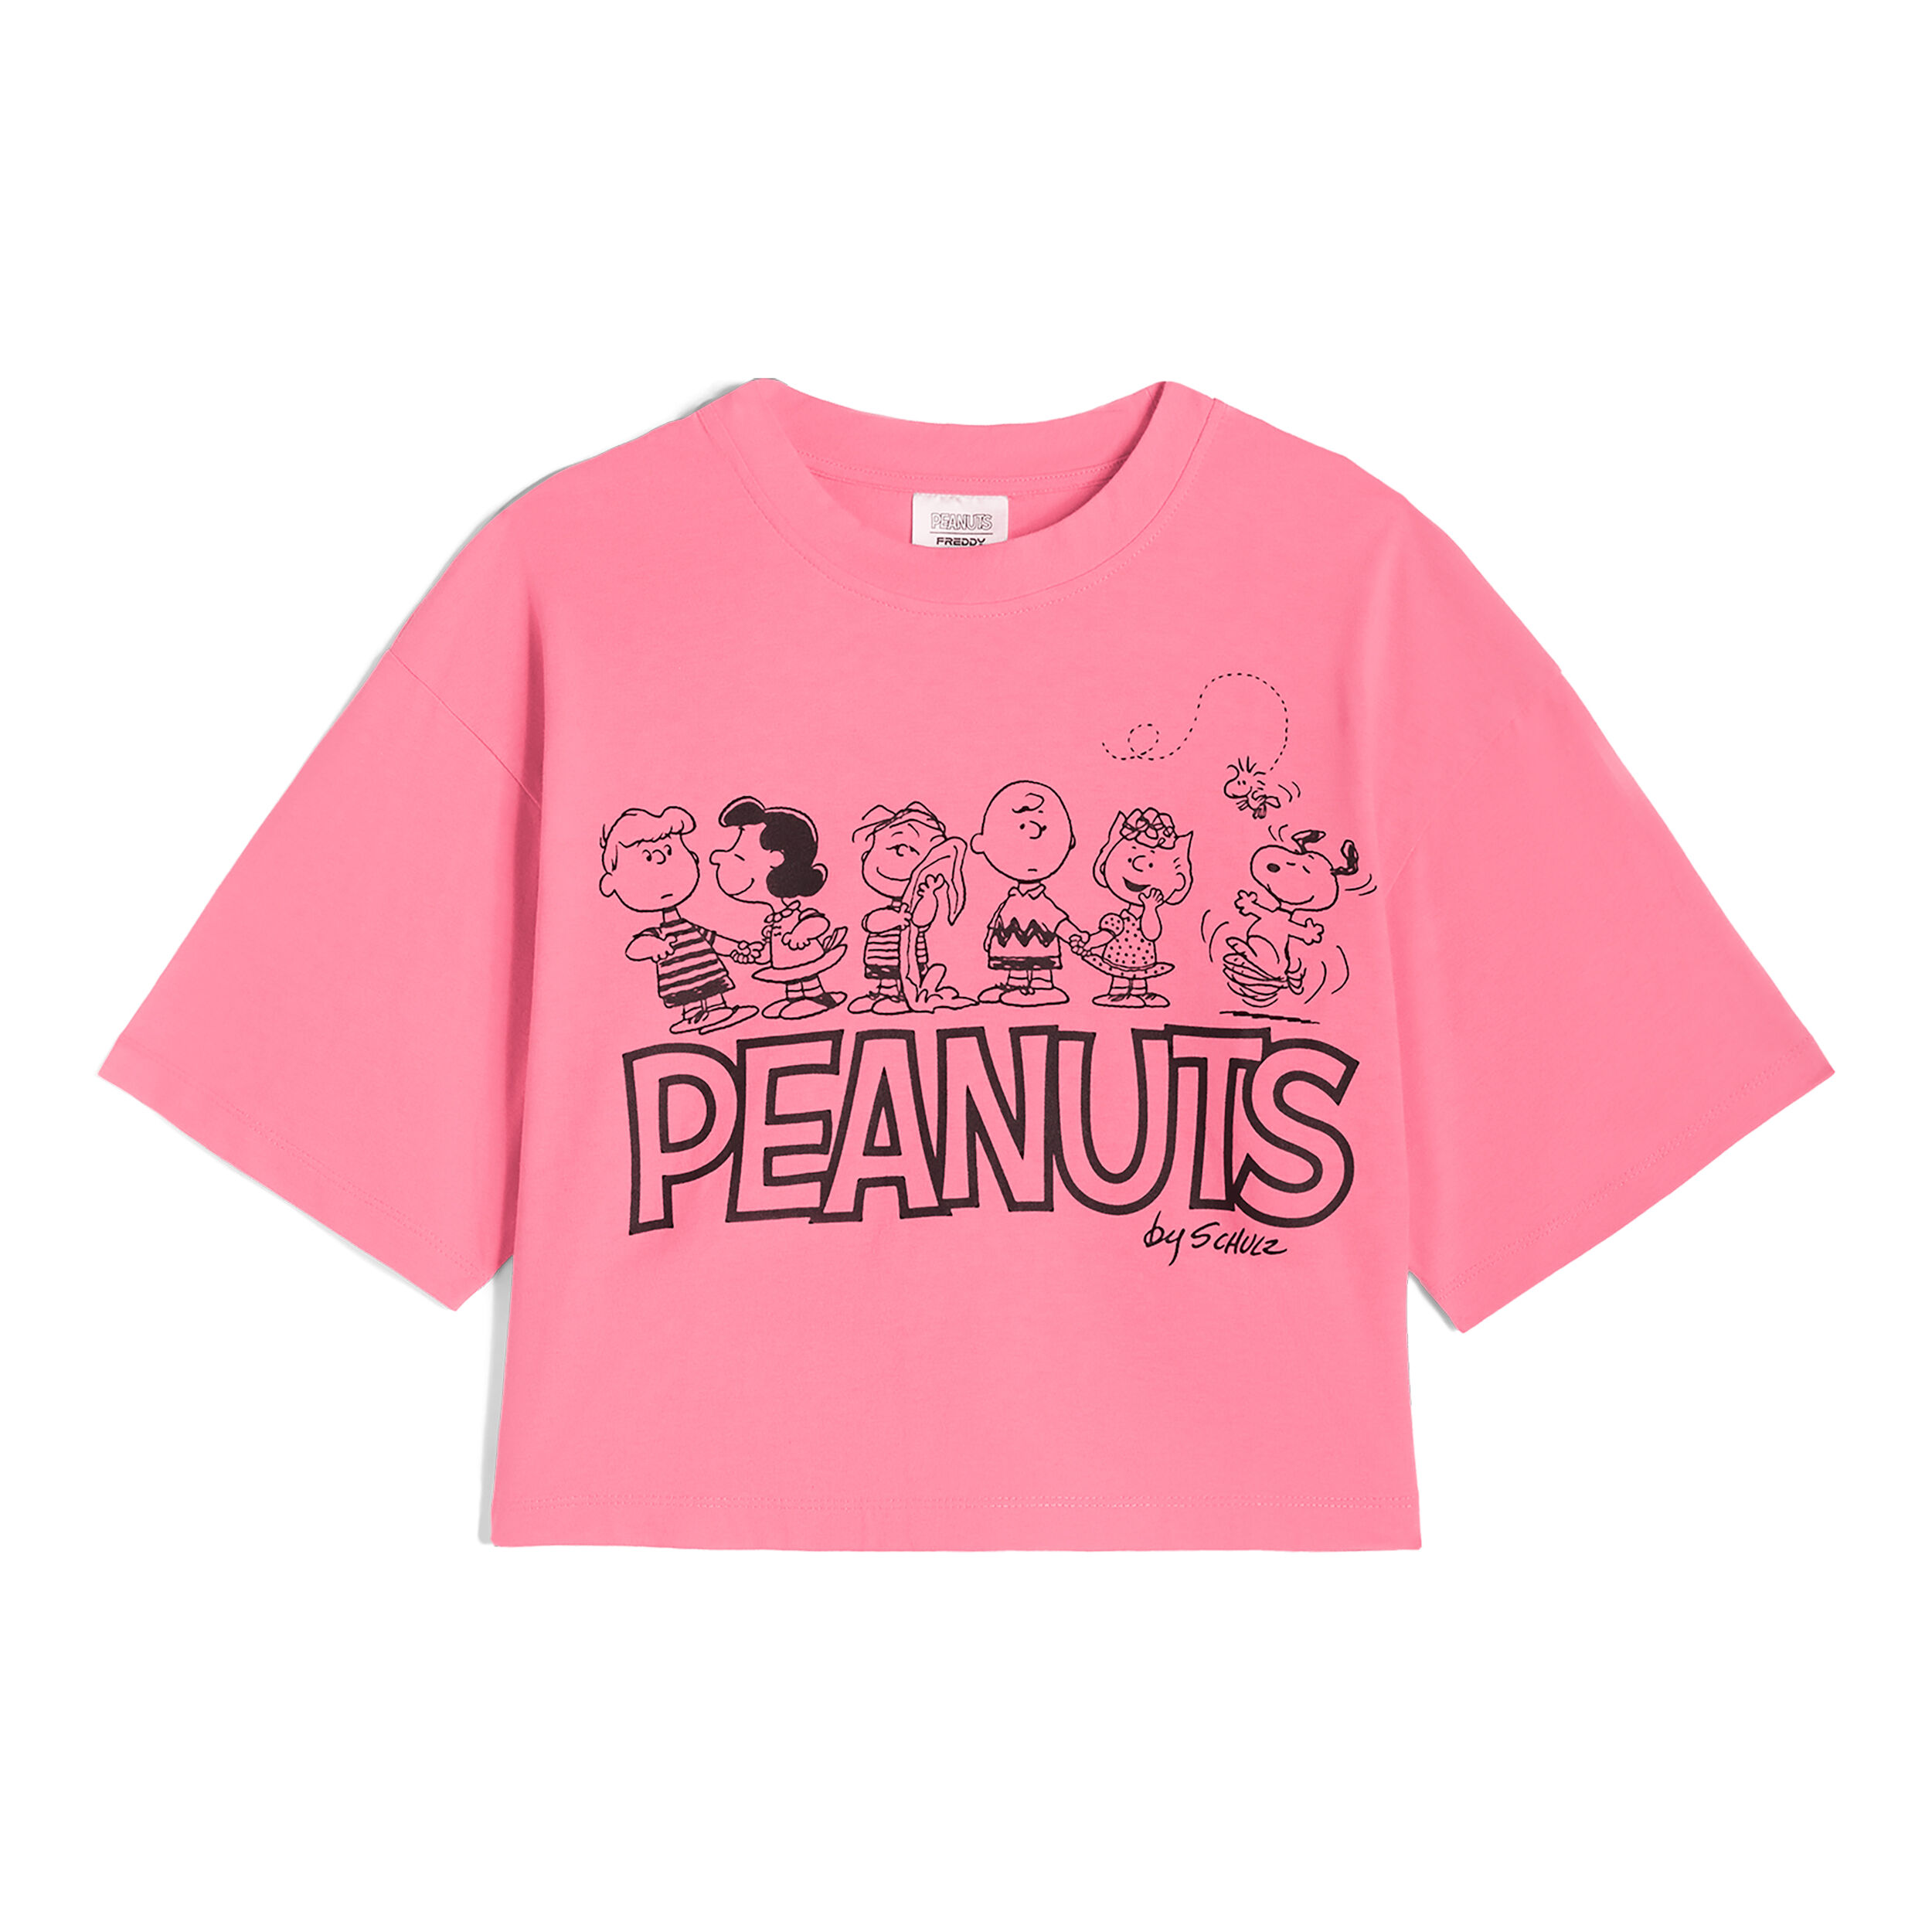 Freddy T-shirt donna corta in jersey con grafica Peanuts Pink Carnation Donna Large